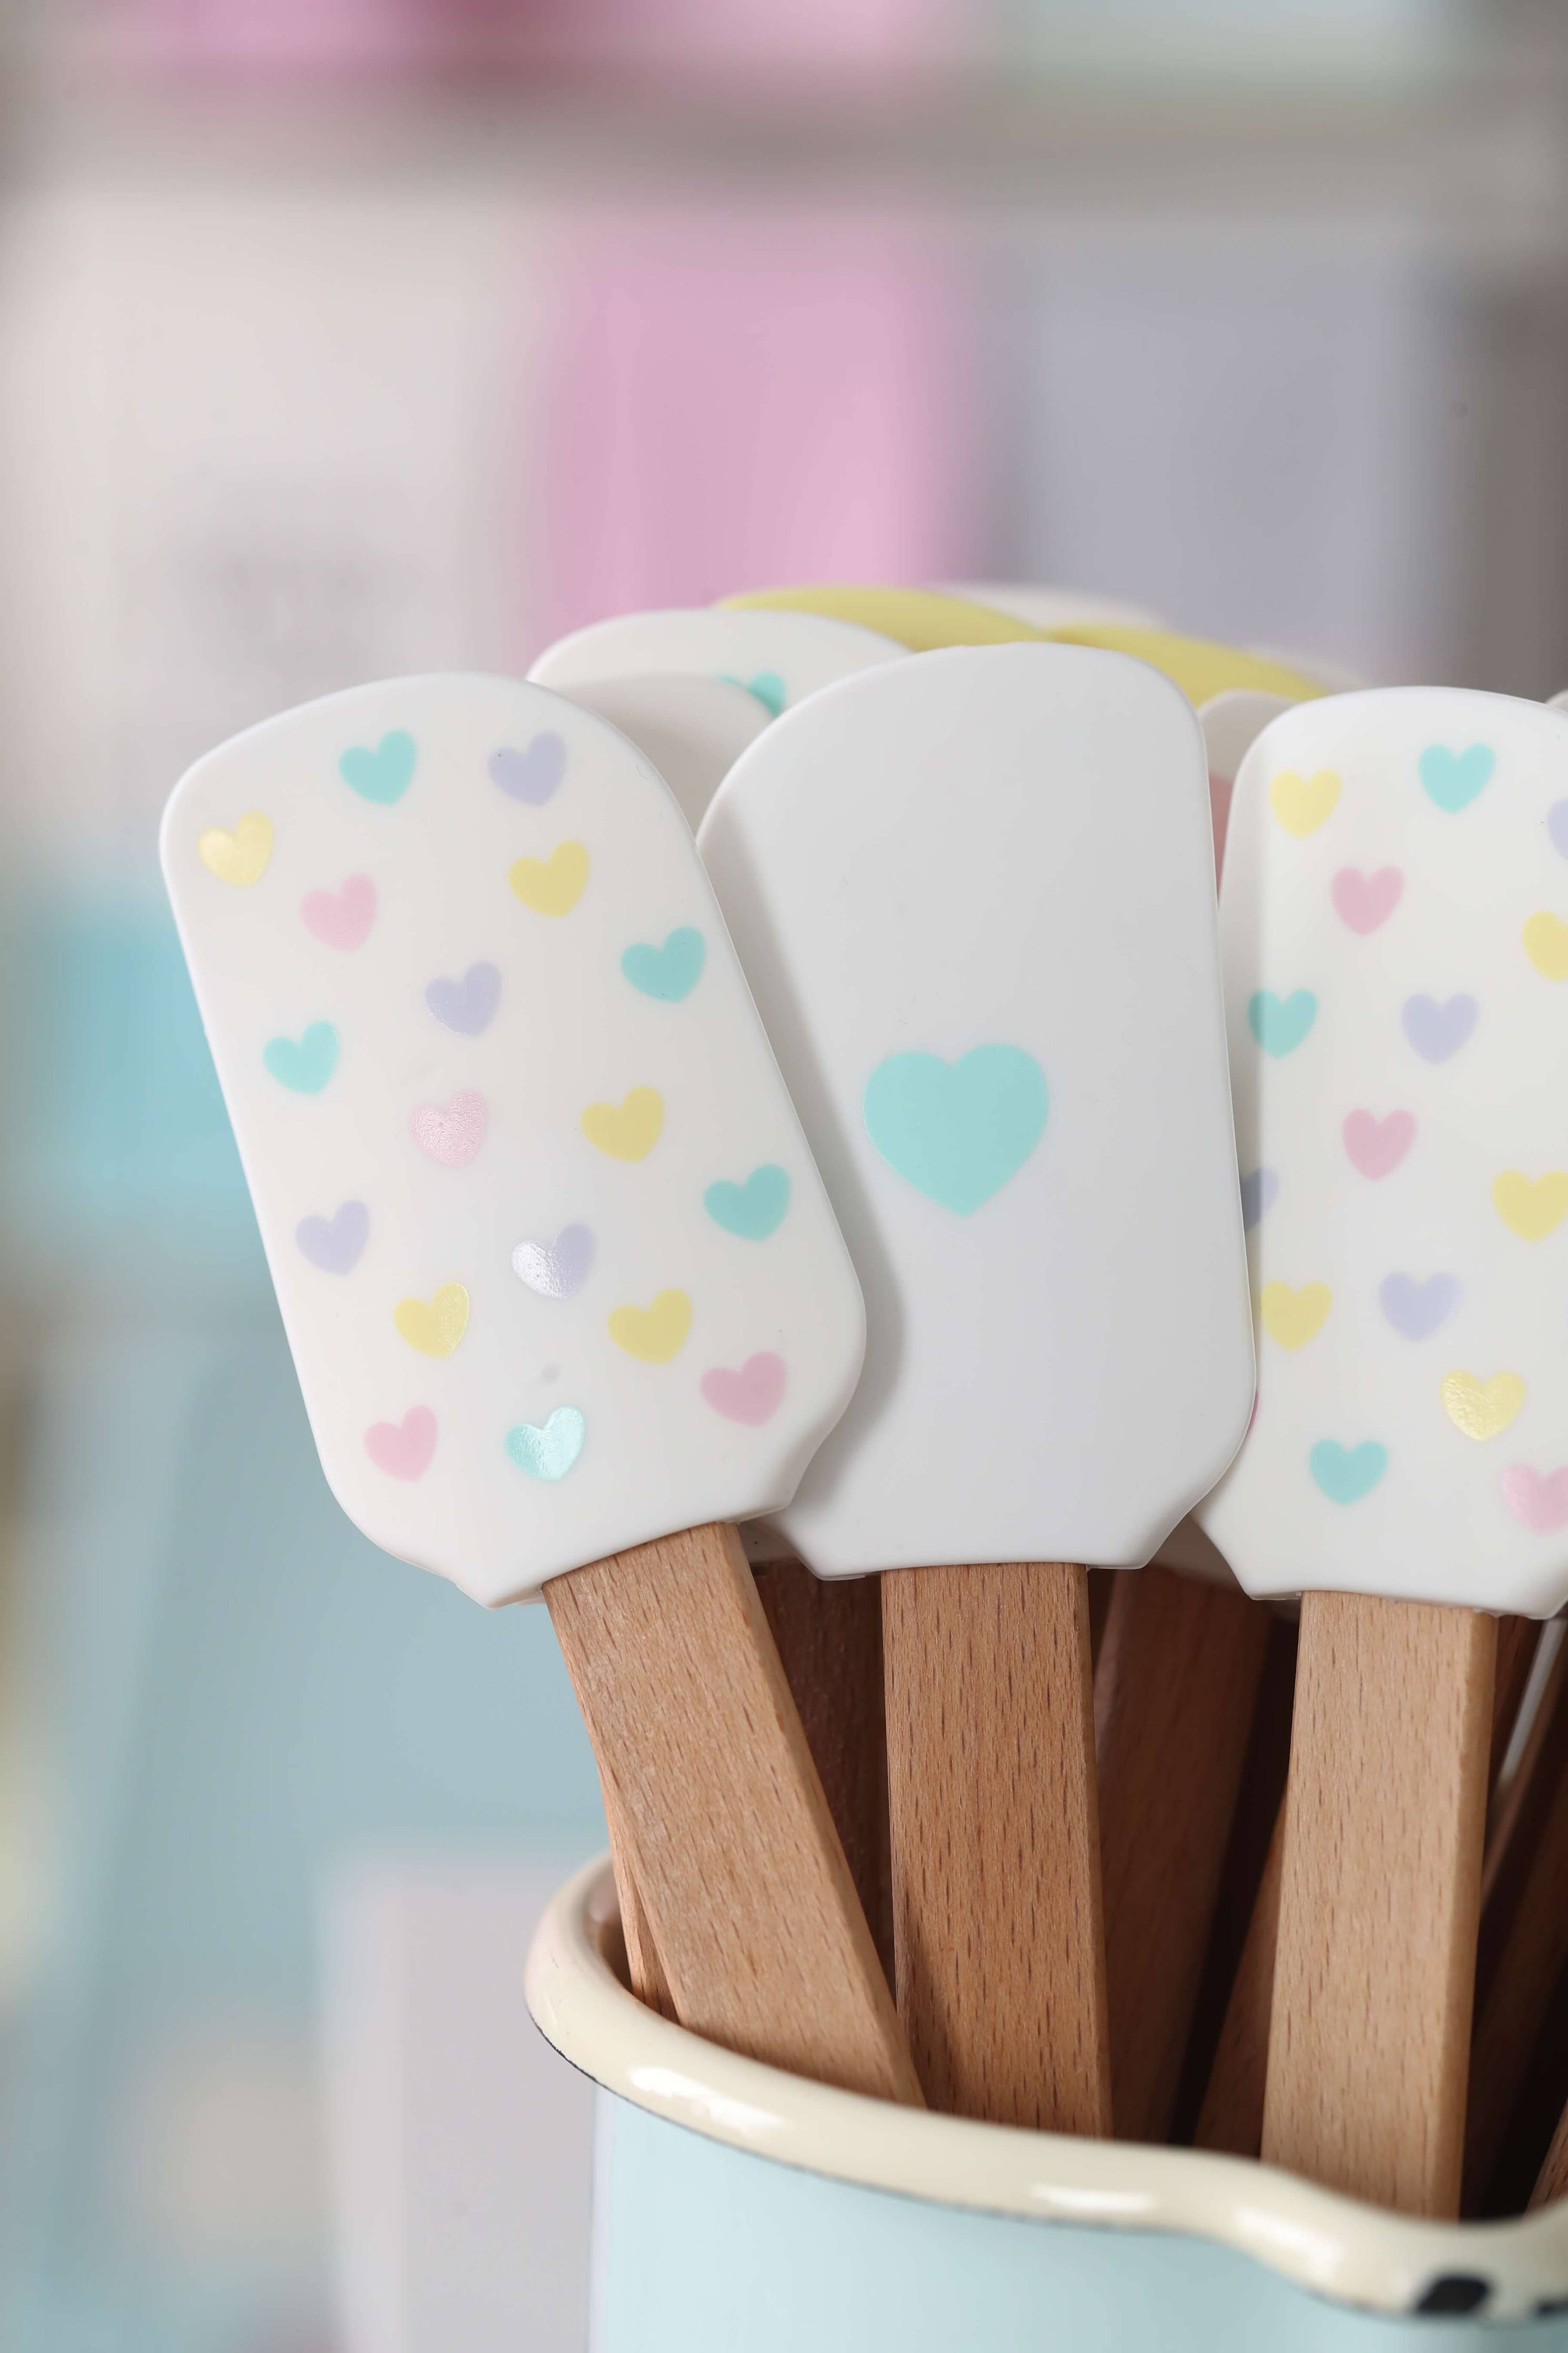 Miss Étoile Spatula with hearts all over